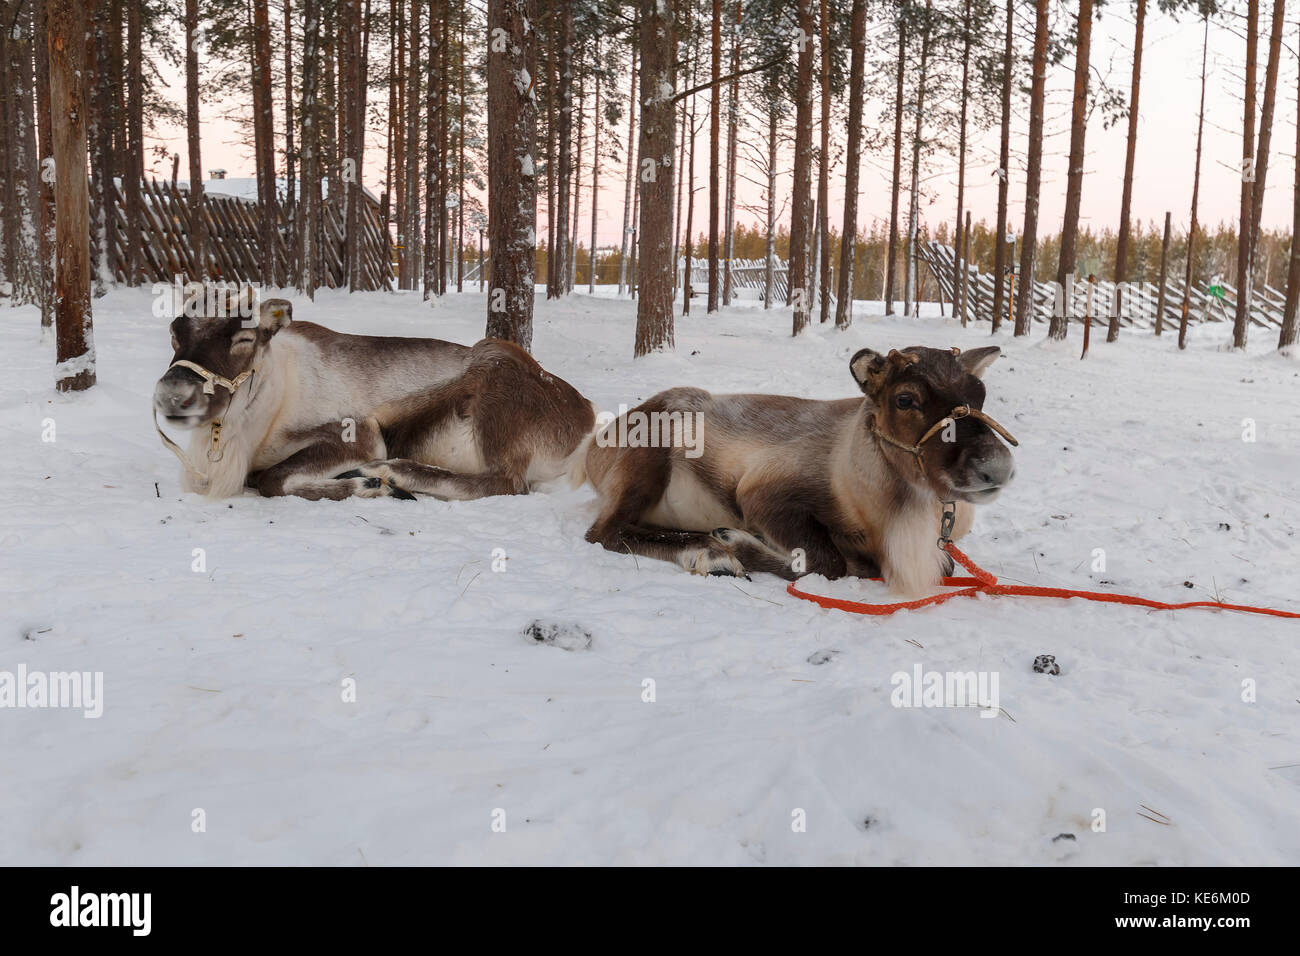 reindeer drawn sleigh in the winter Stock Photo